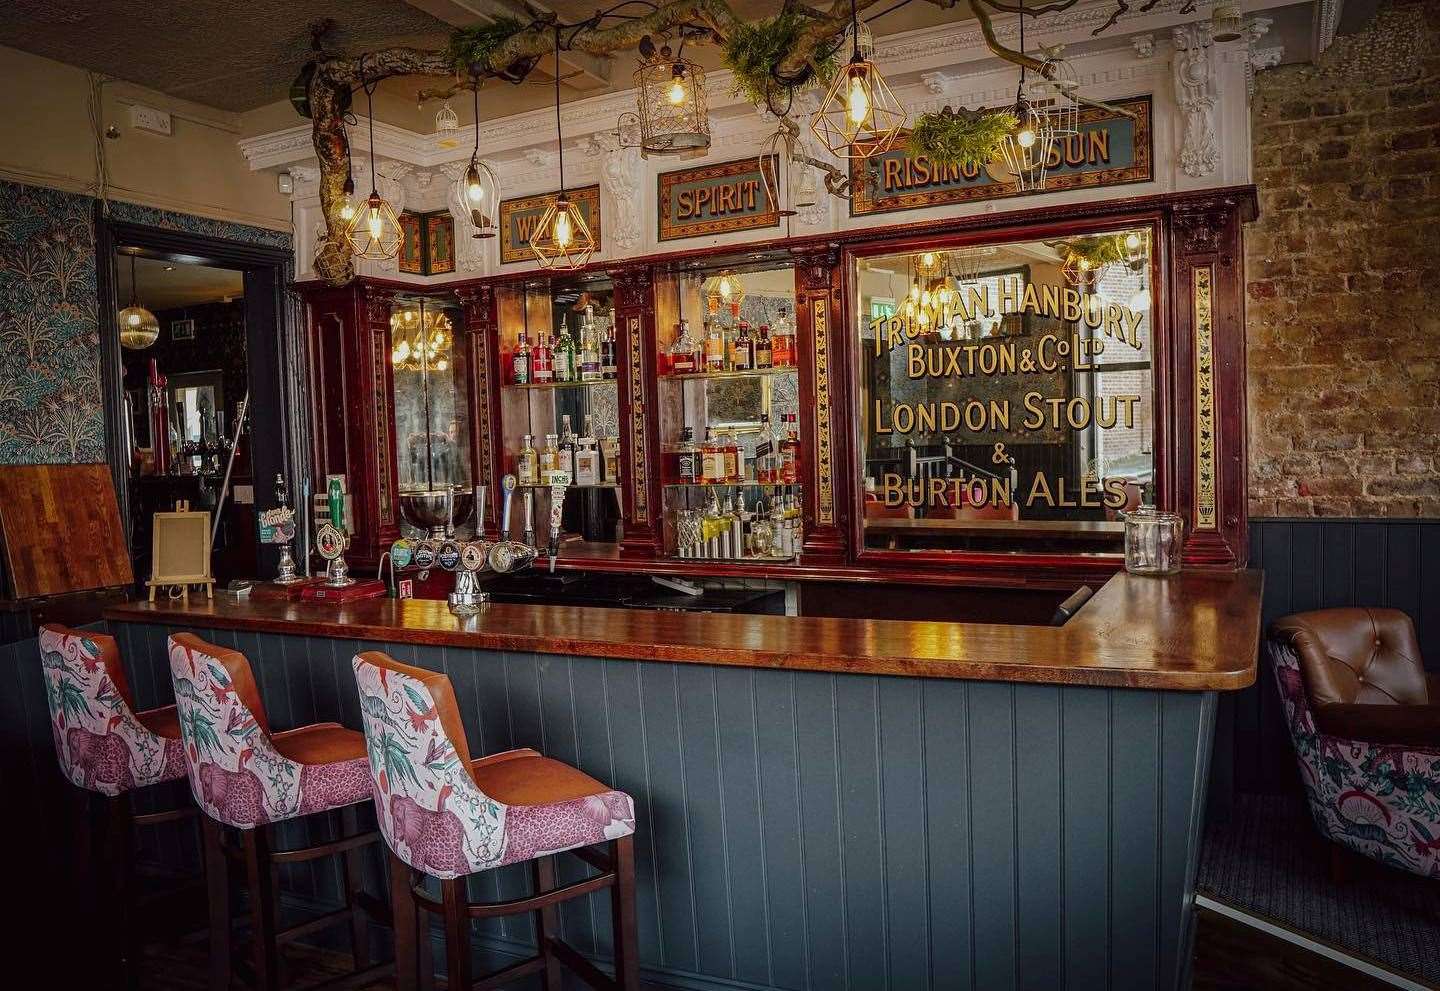 The traditional boozer has been given a fresh new look